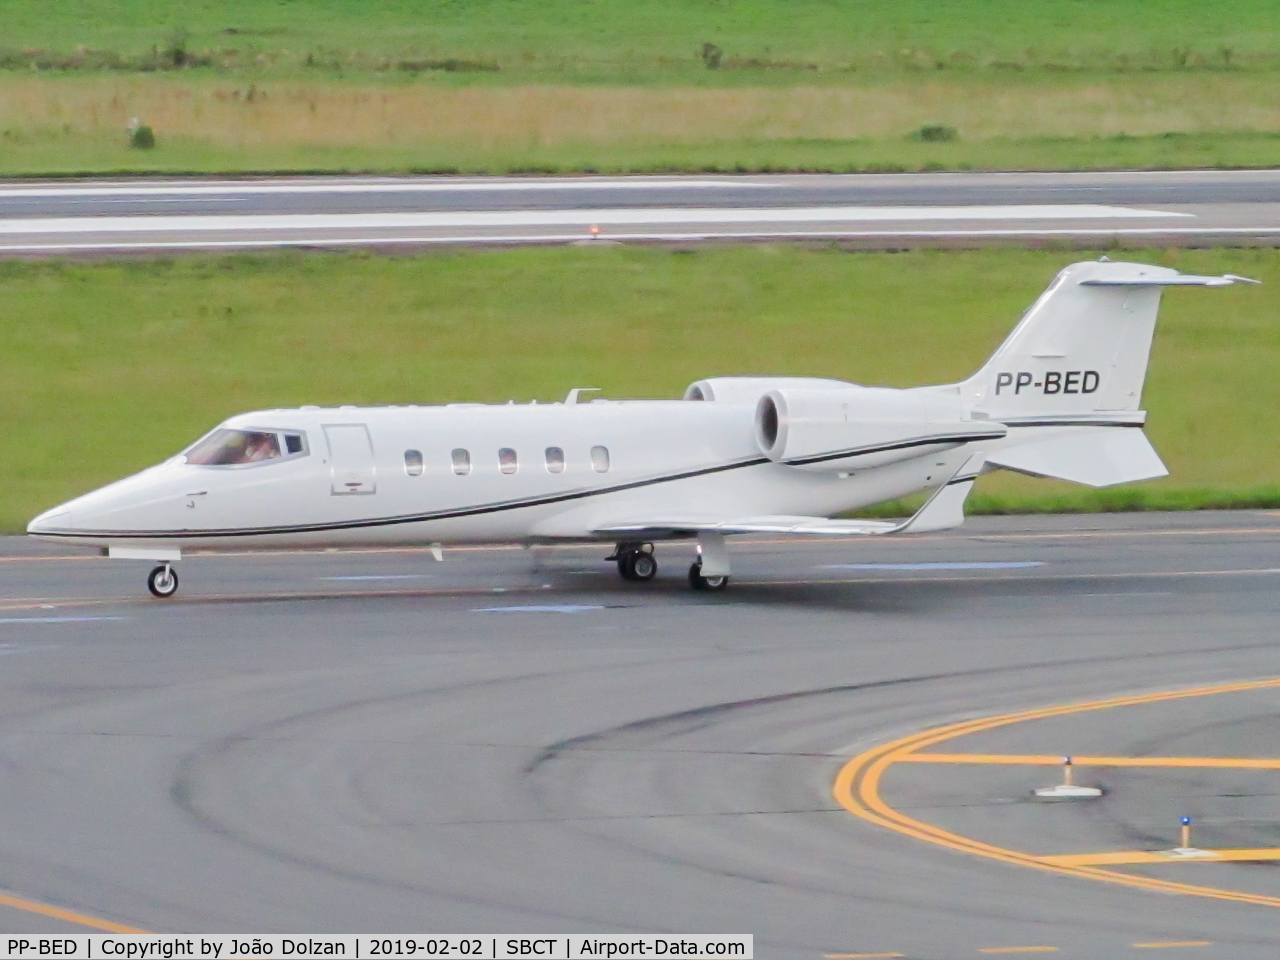 PP-BED, 2006 Learjet 60 C/N 60-310, Taxiing at SBCT.